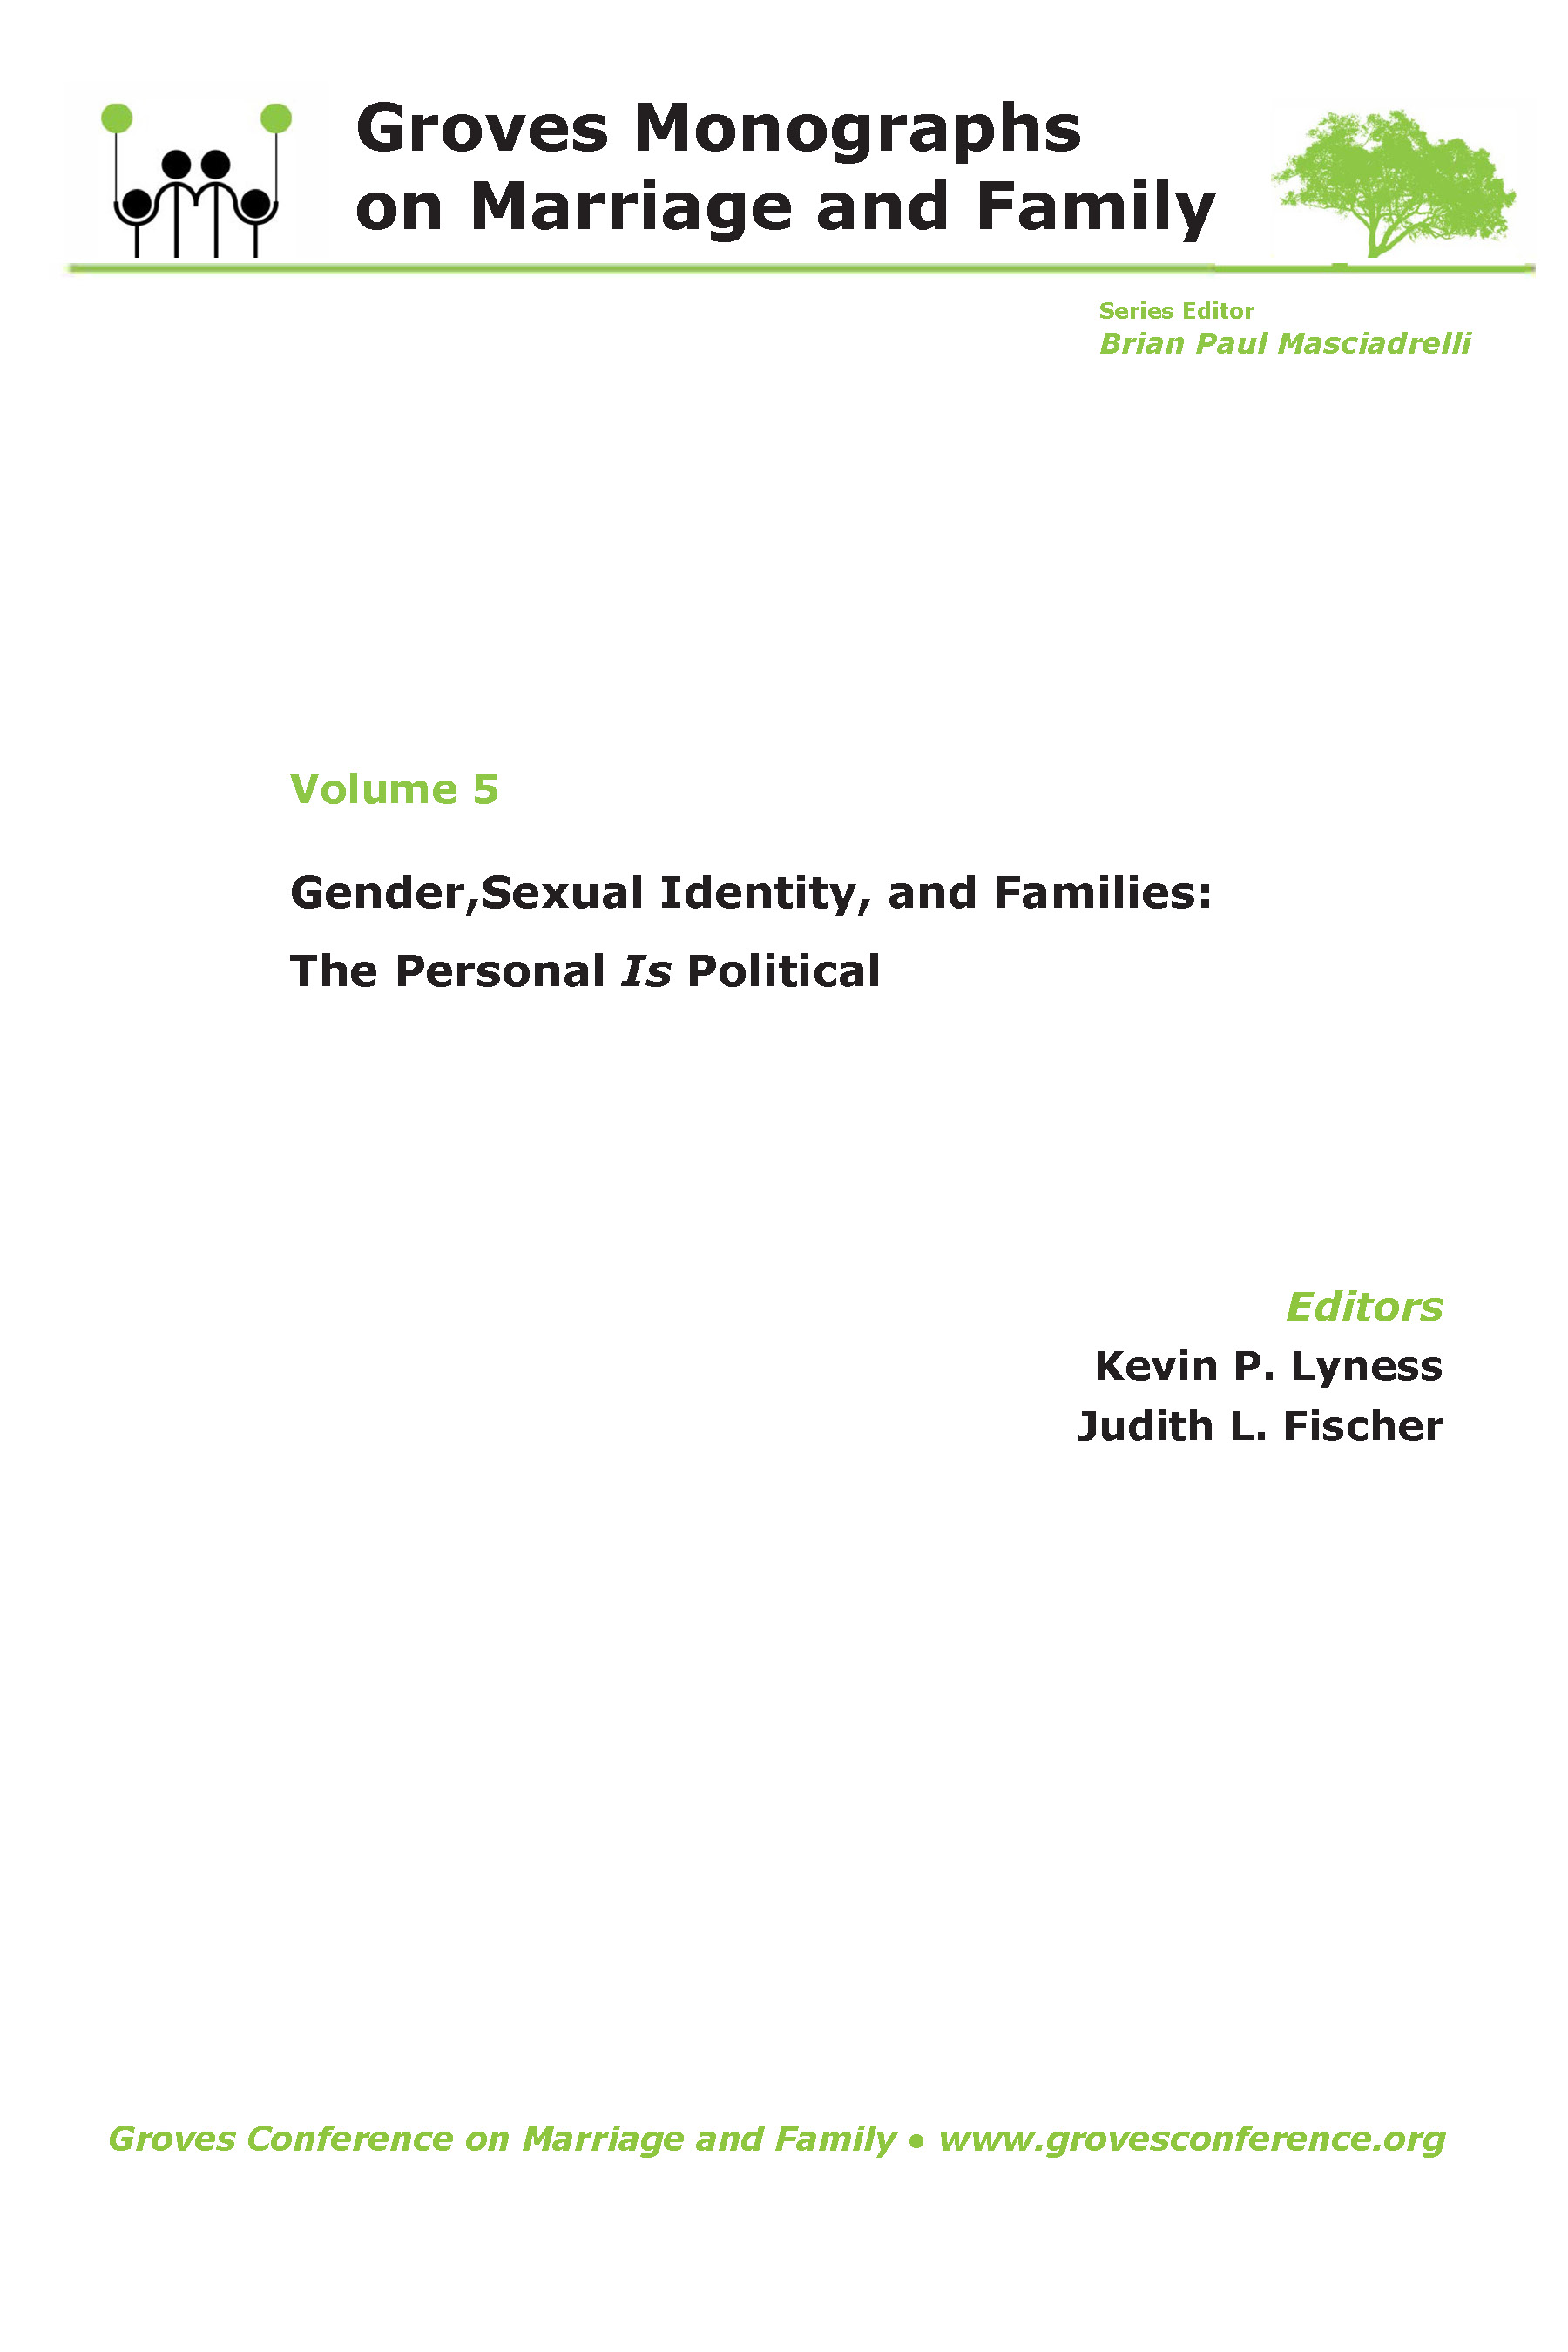 Gender, Sexual Identity, and Families: The Personal Is